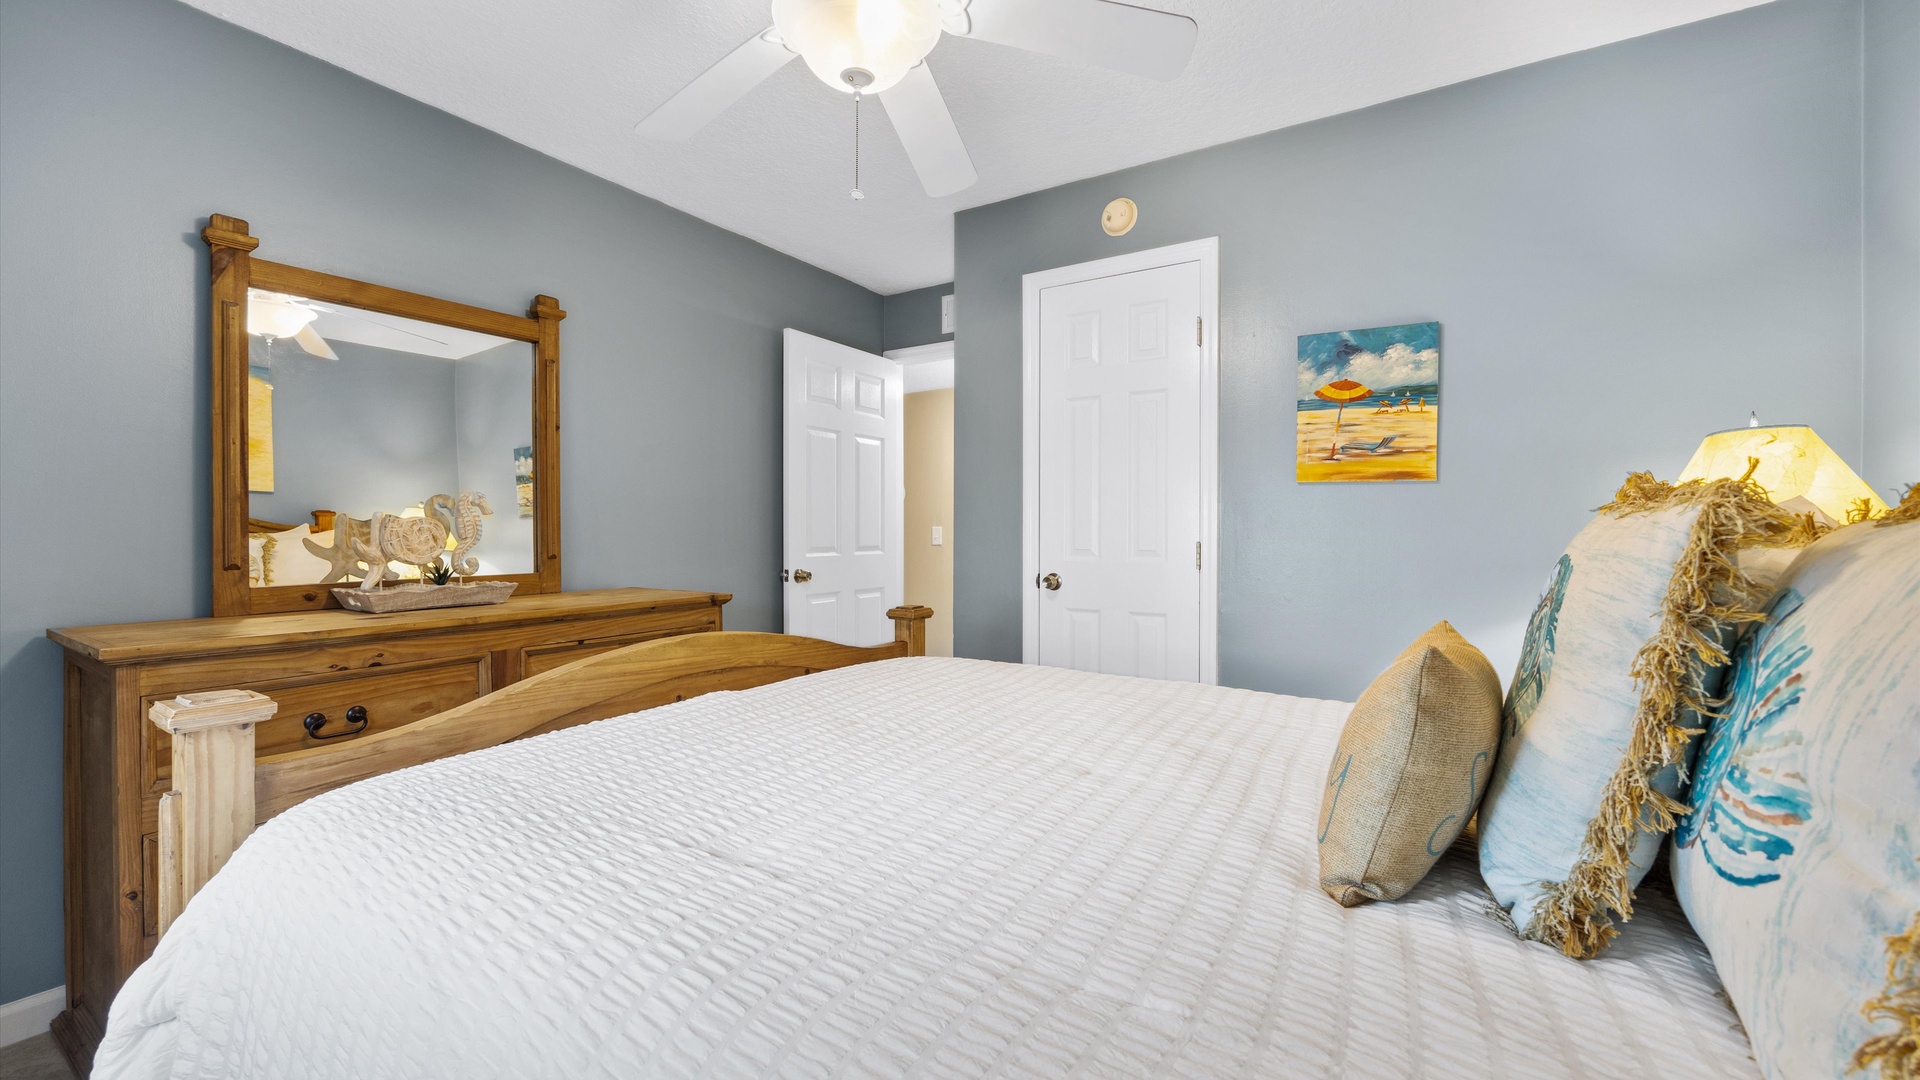 The second bedroom features a regal queen-sized bed